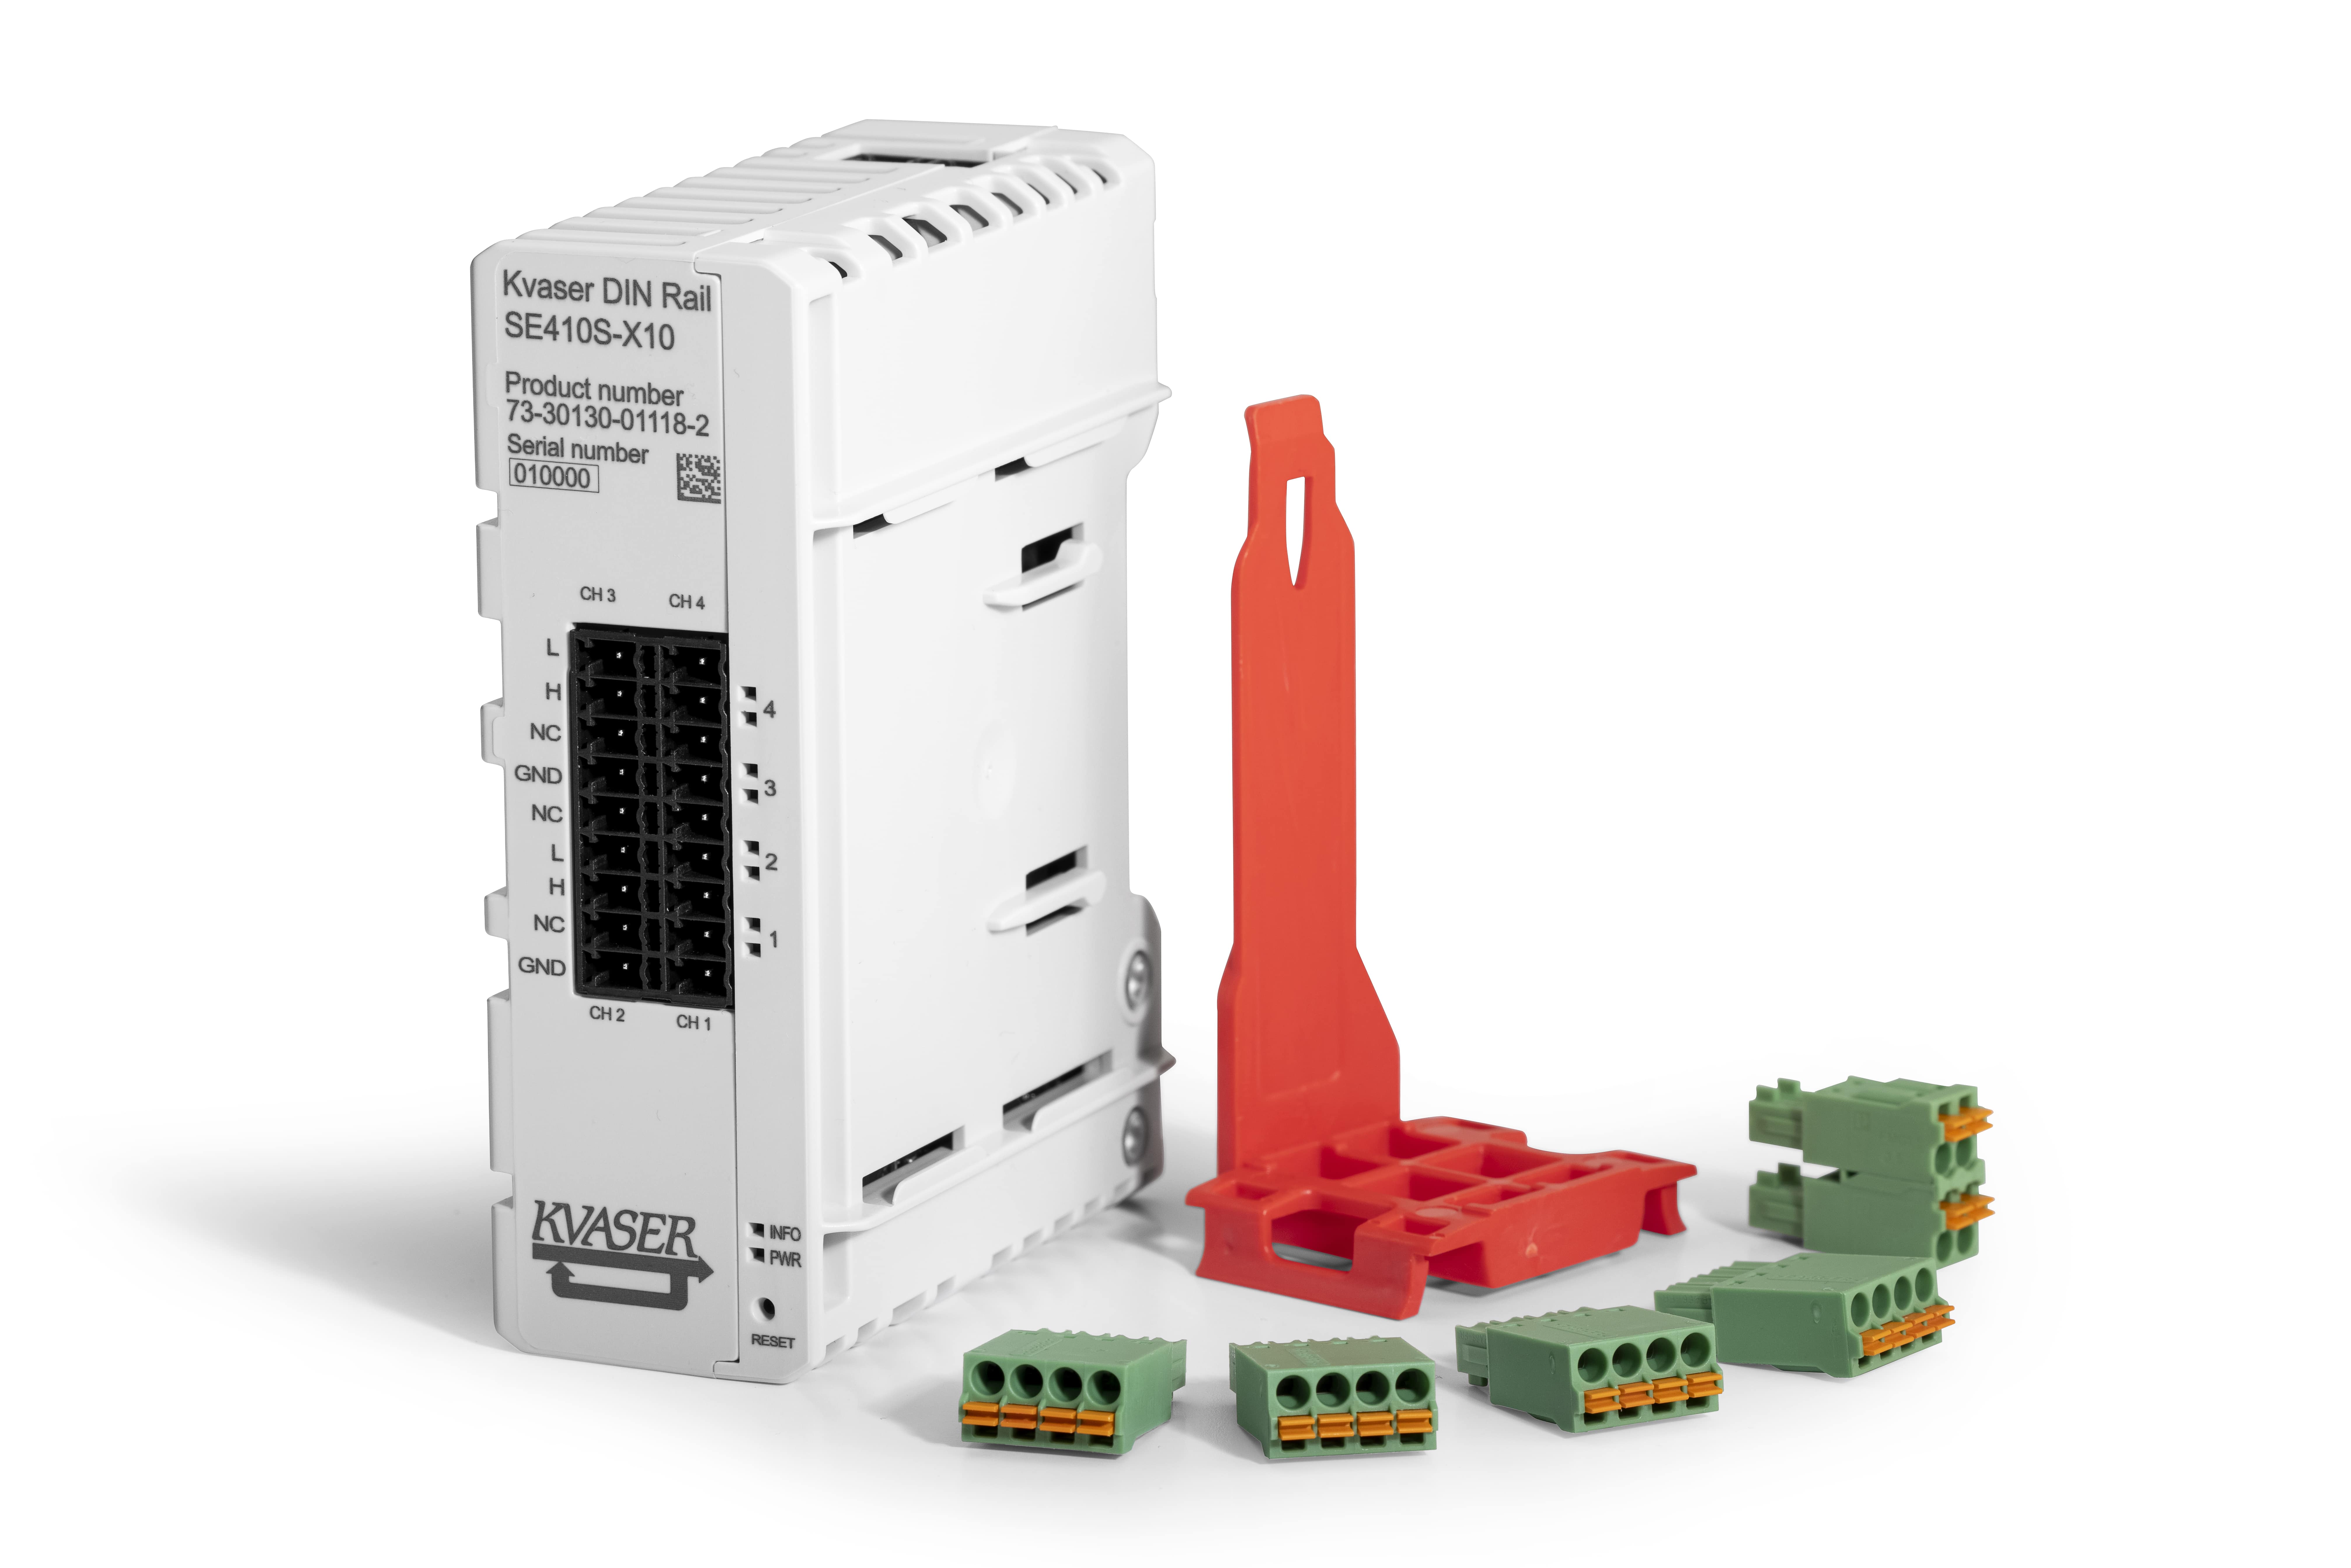 Kvaser DIN Rail SE410S-X10 Ethernet-to-CAN(FD) multi-channel interface